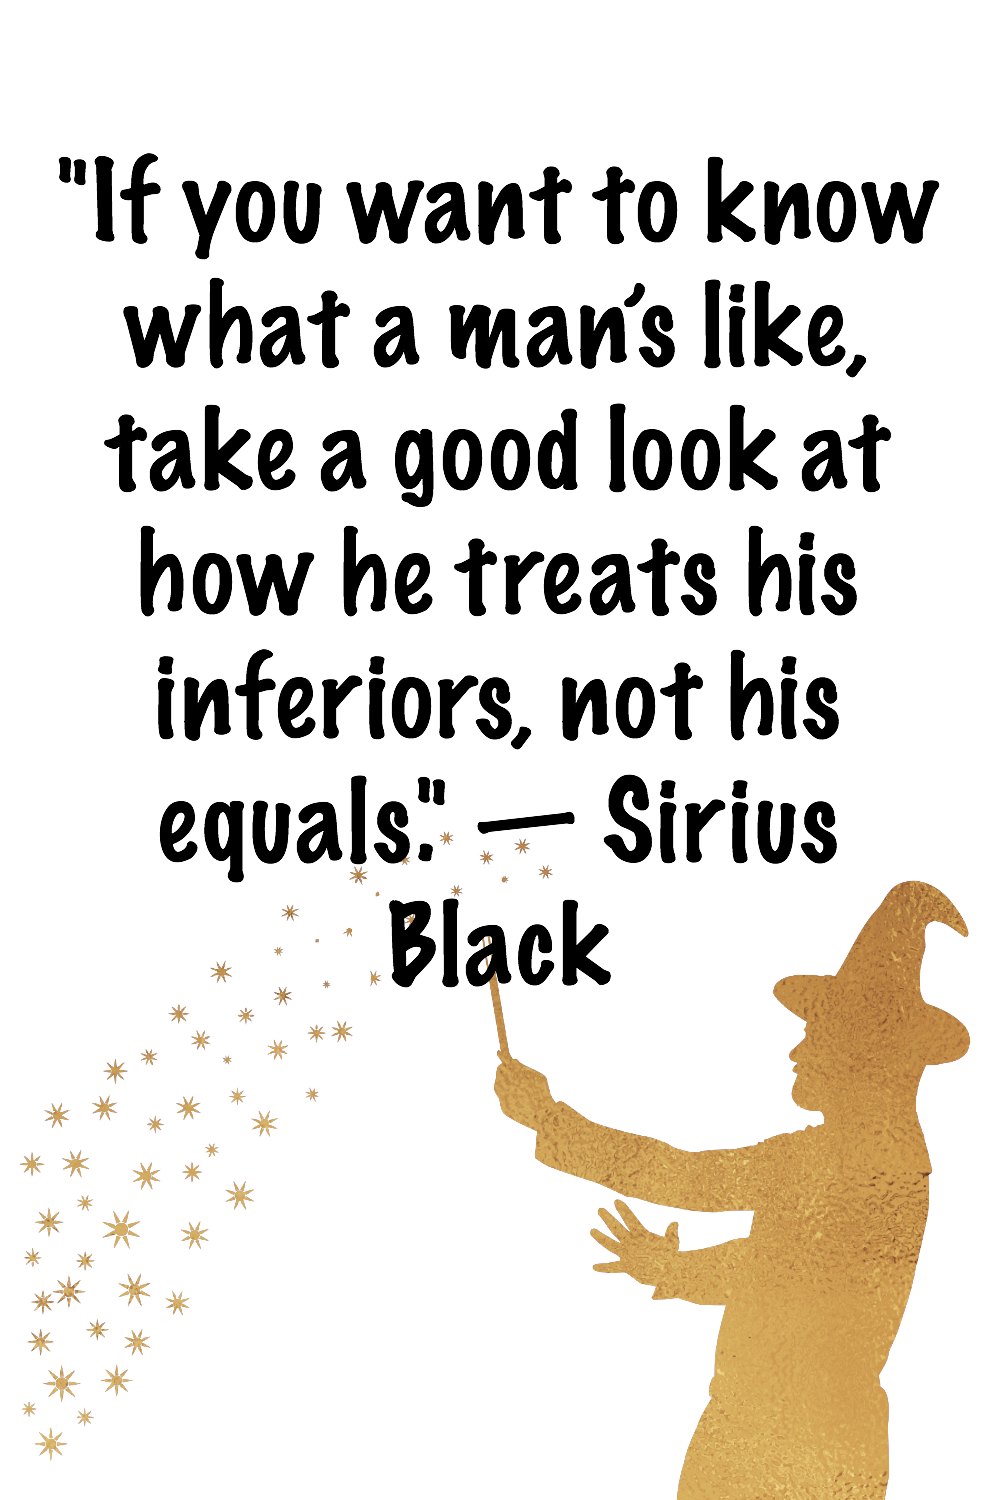 Sirius Black quotes from Harry